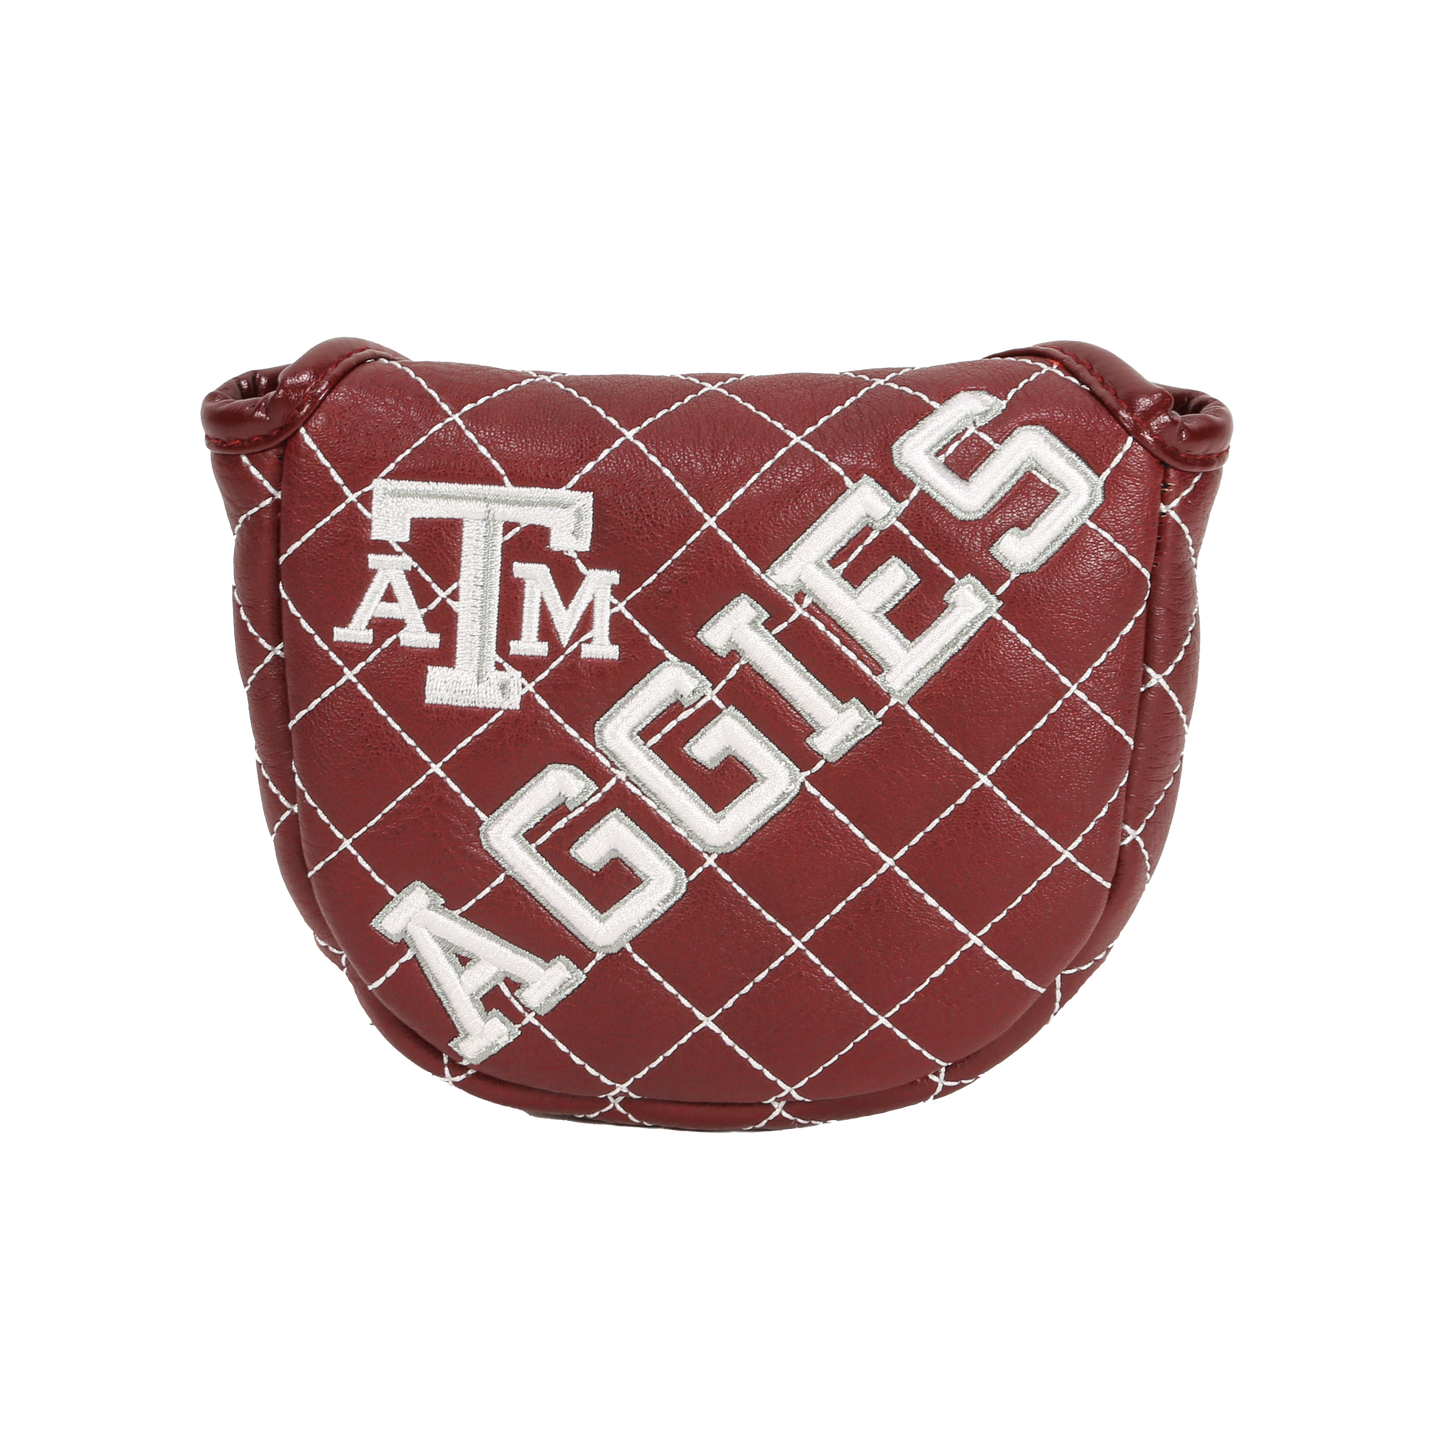 Texas A&M "Aggies" Mallet Putter Cover